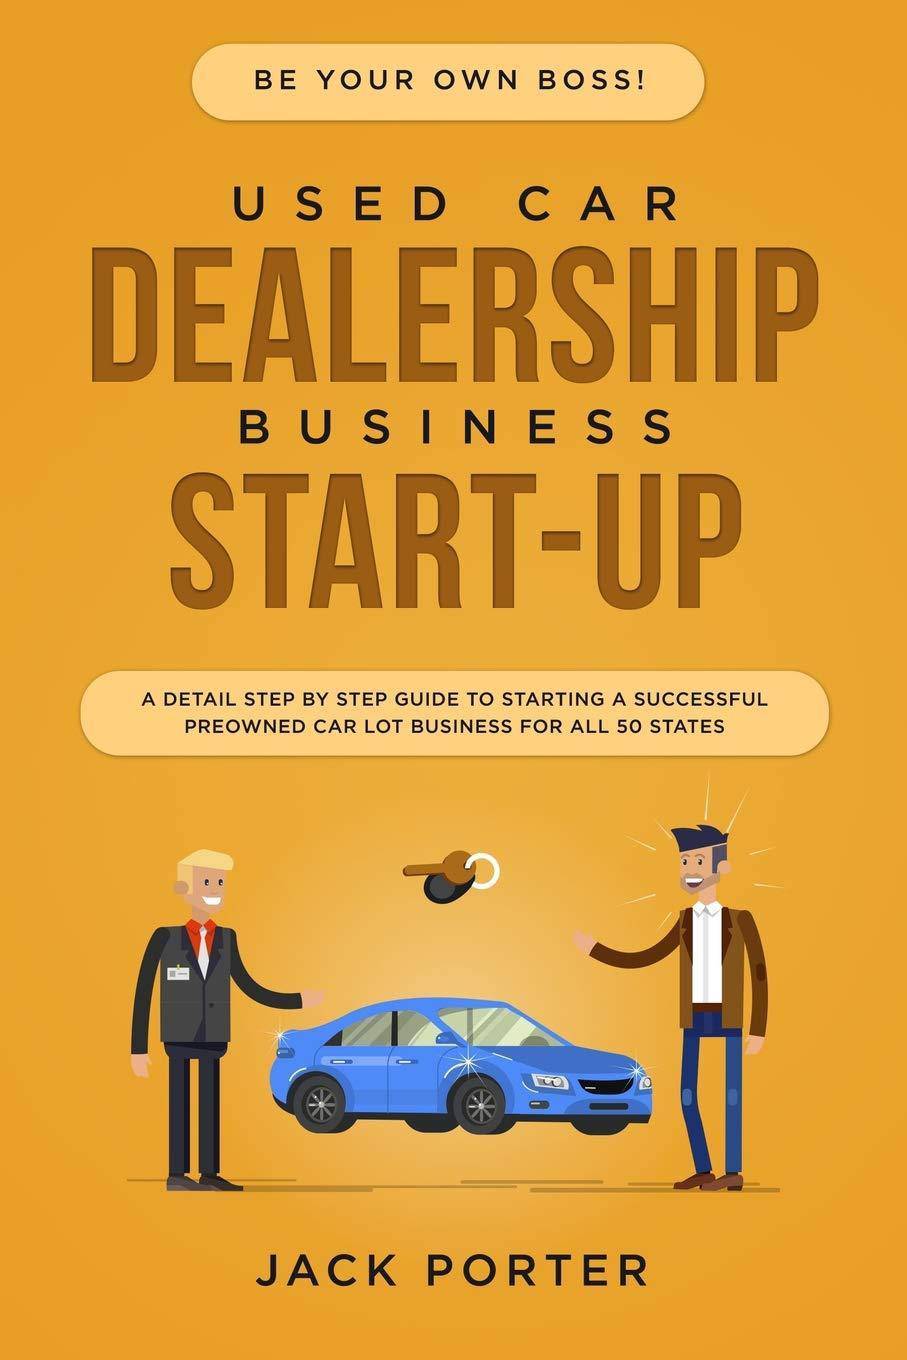 Be Your Own Boss! Used Car Dealership Business Startup: A Detail - SureShot Books Publishing LLC